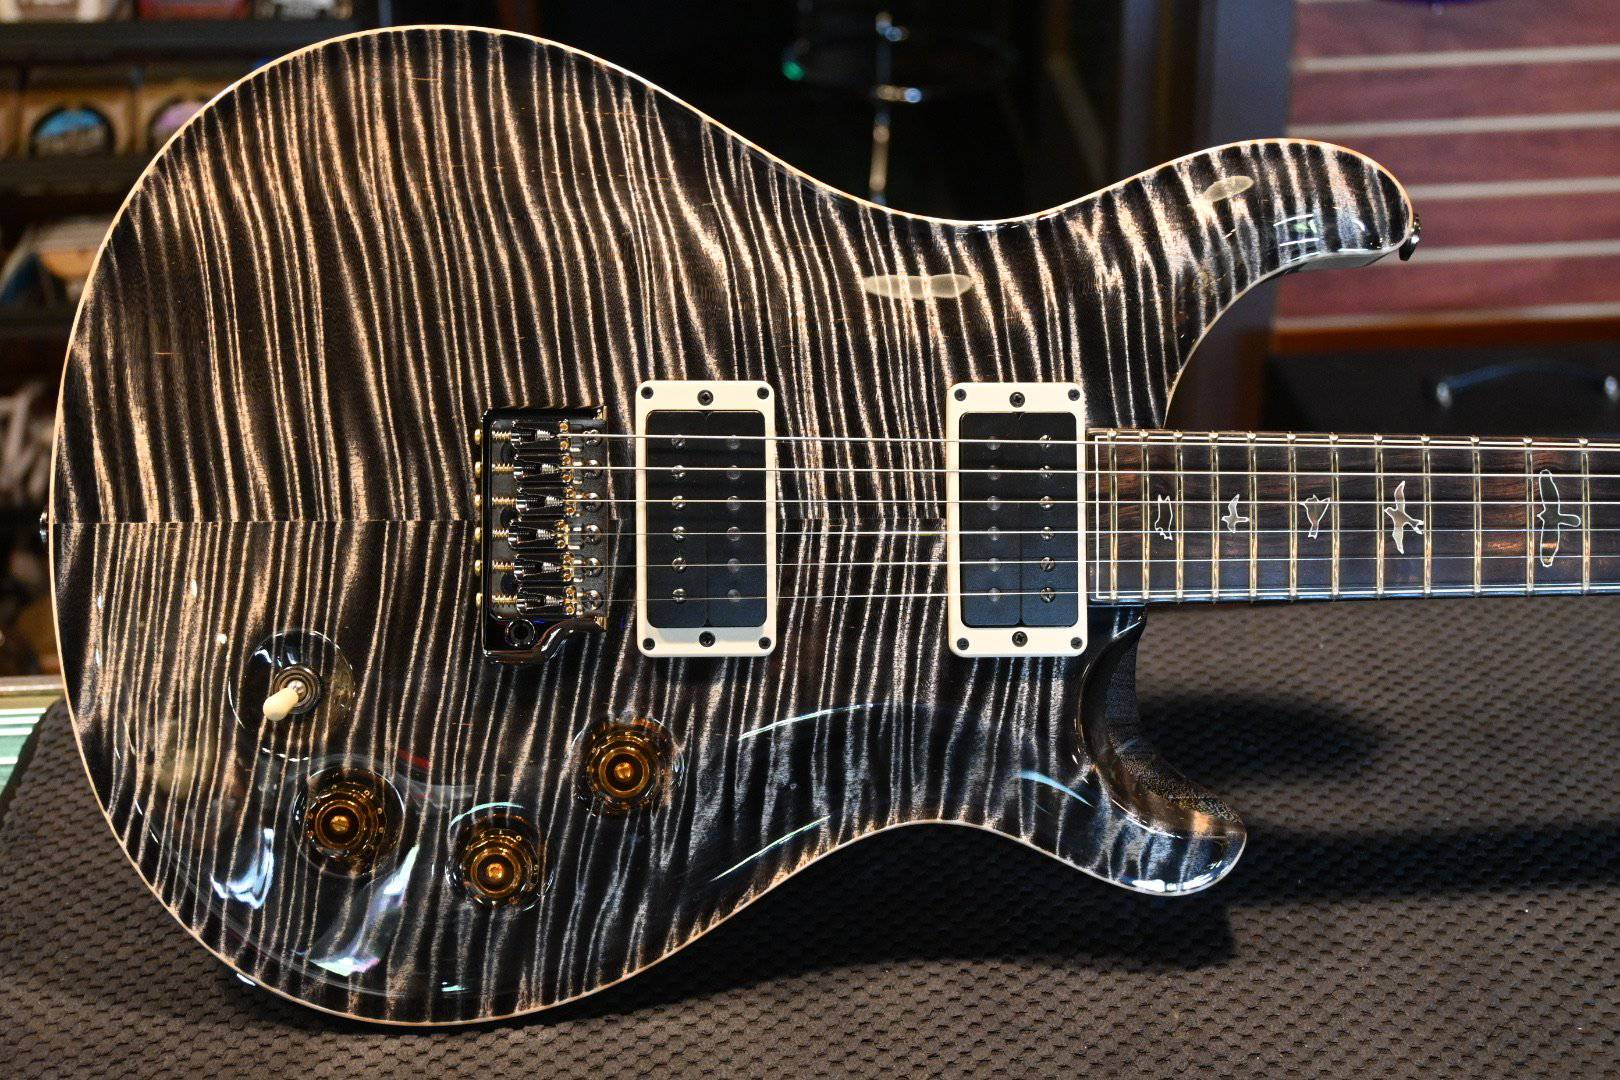 PRS Paul Reed Smith Private Stock DGT - Charcoal/Black with White Grainfill #8657 - Danville Music